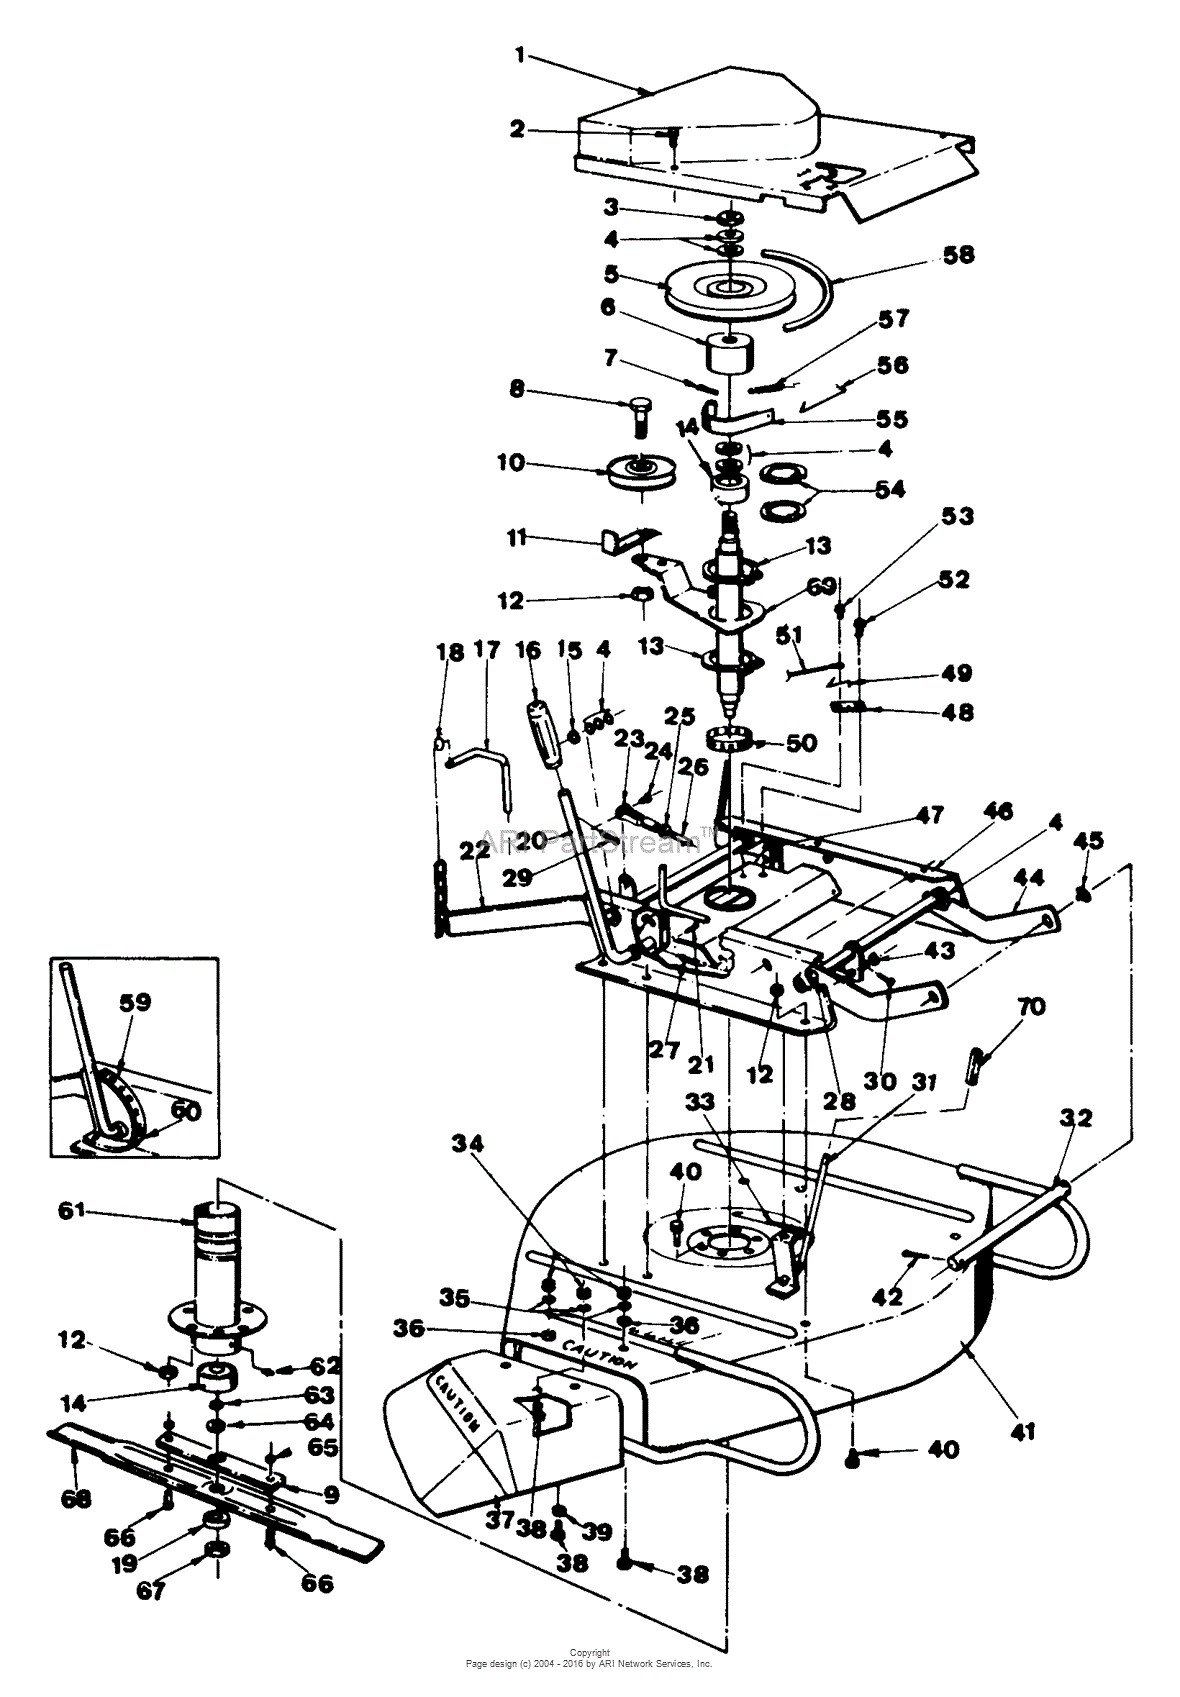 Snapper Rear Engine Rider Wiring Diagram Snapper 2650s 26&quot; 5 Hp Rear Engine Rider Series 0 Parts Diagram for